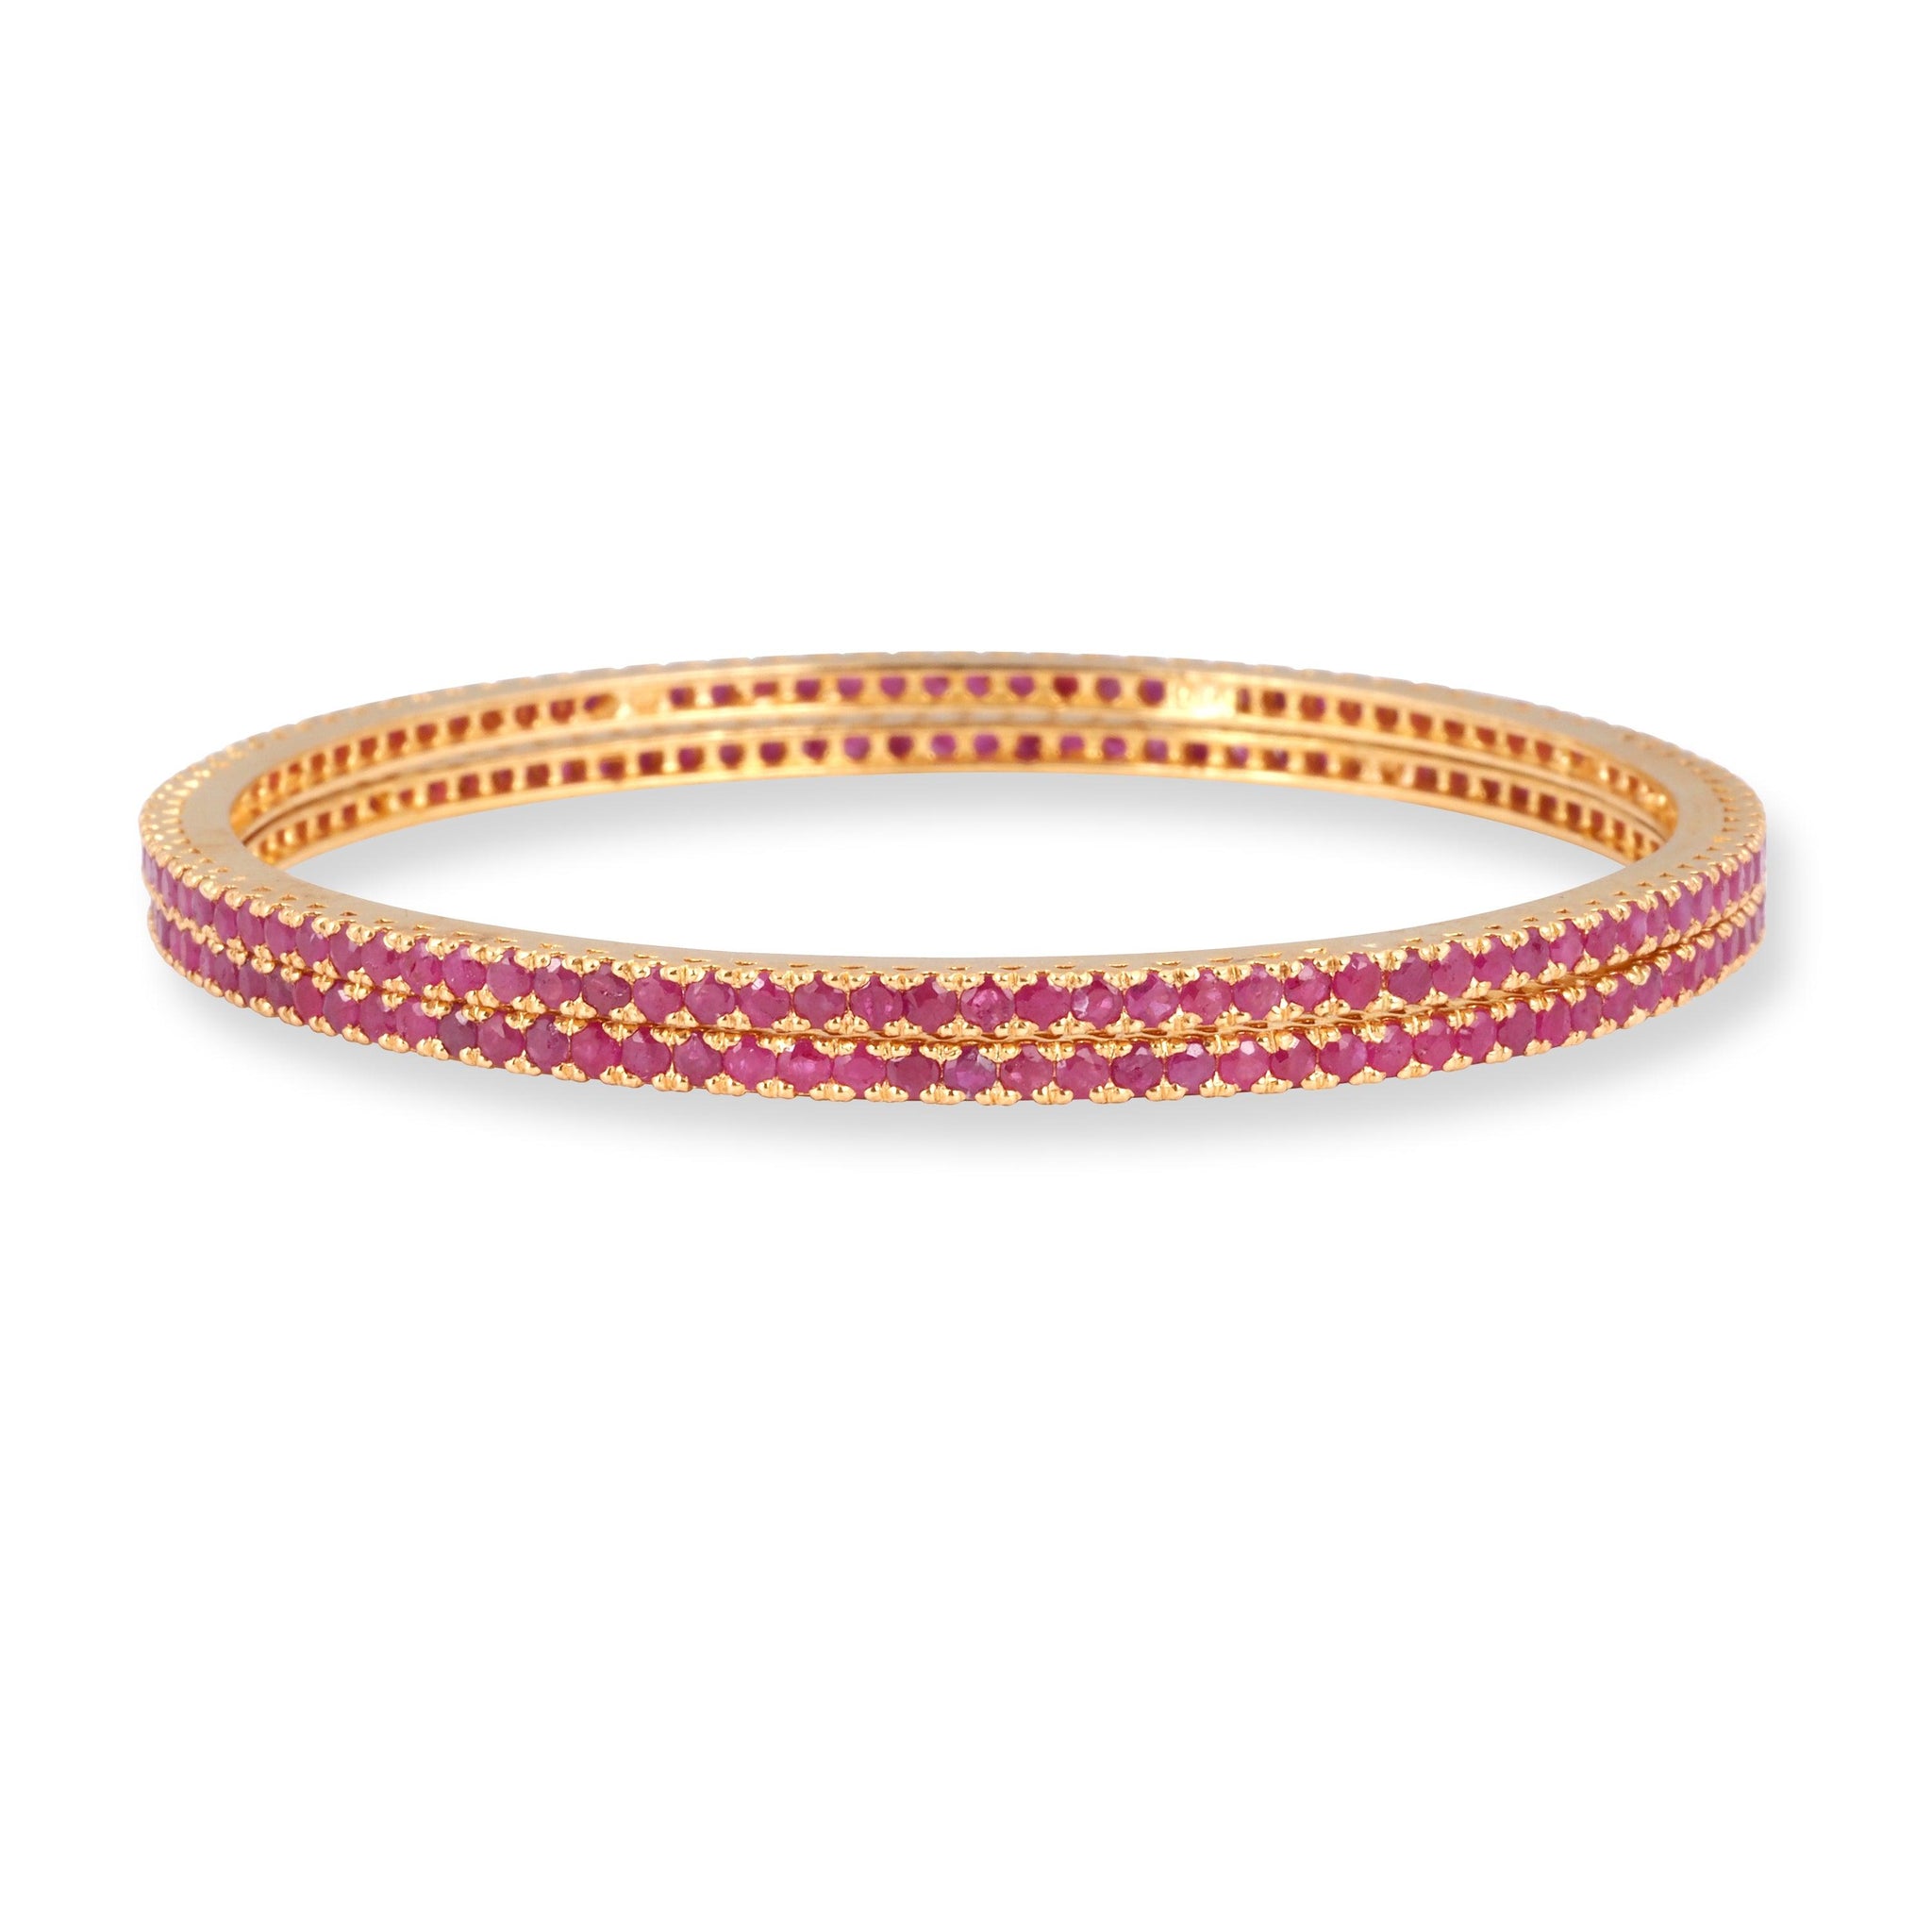 Pair of 22ct Gold Bangles with Pink Stones B-8562